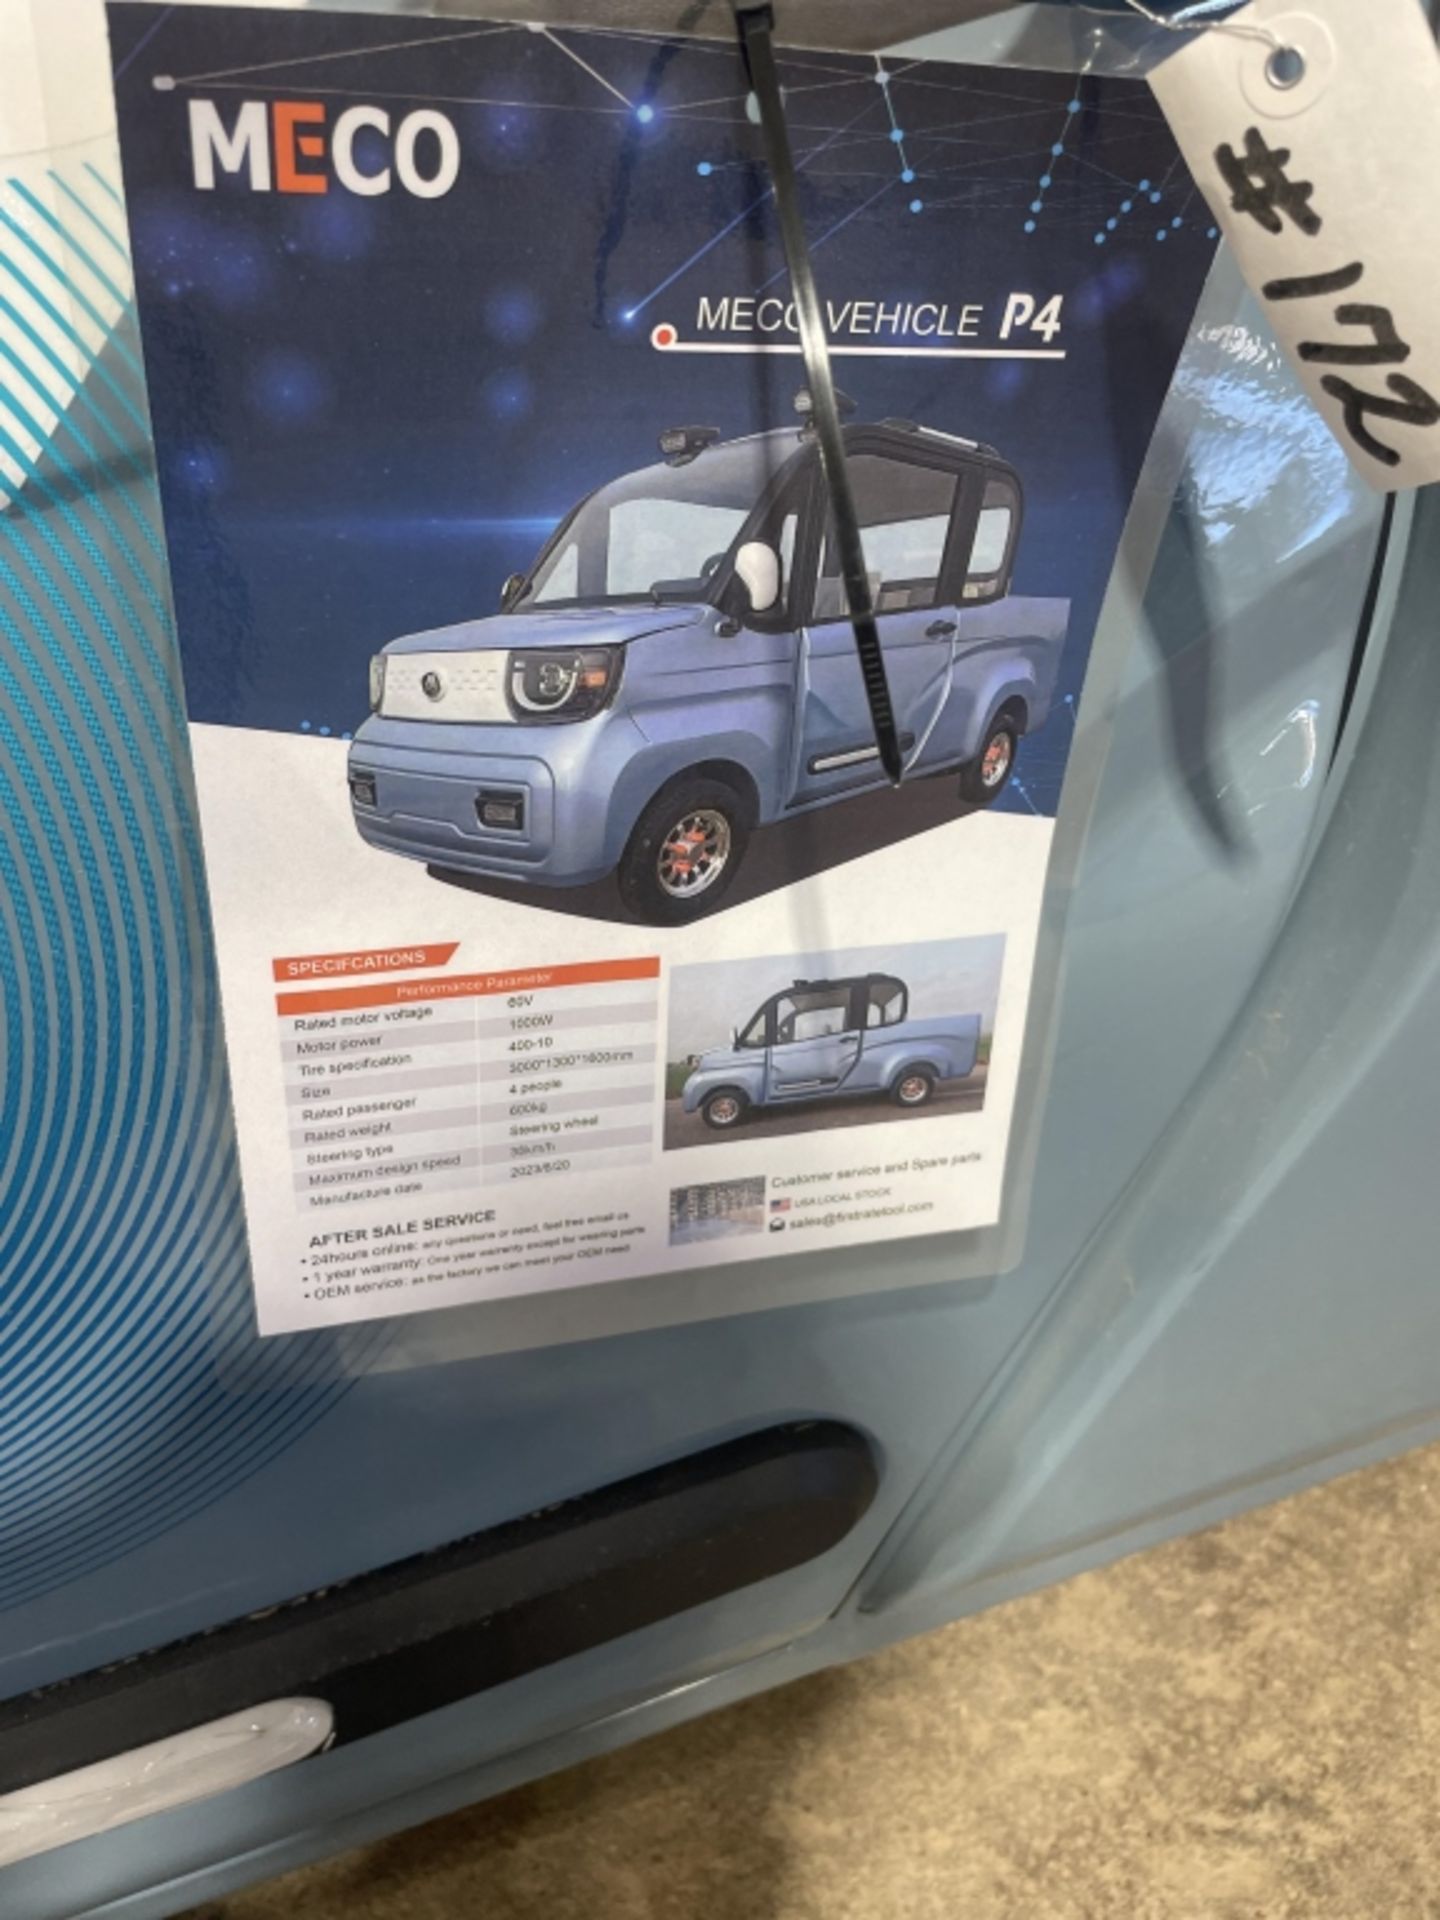 MECO P4 Electric Vehicle - Image 11 of 15